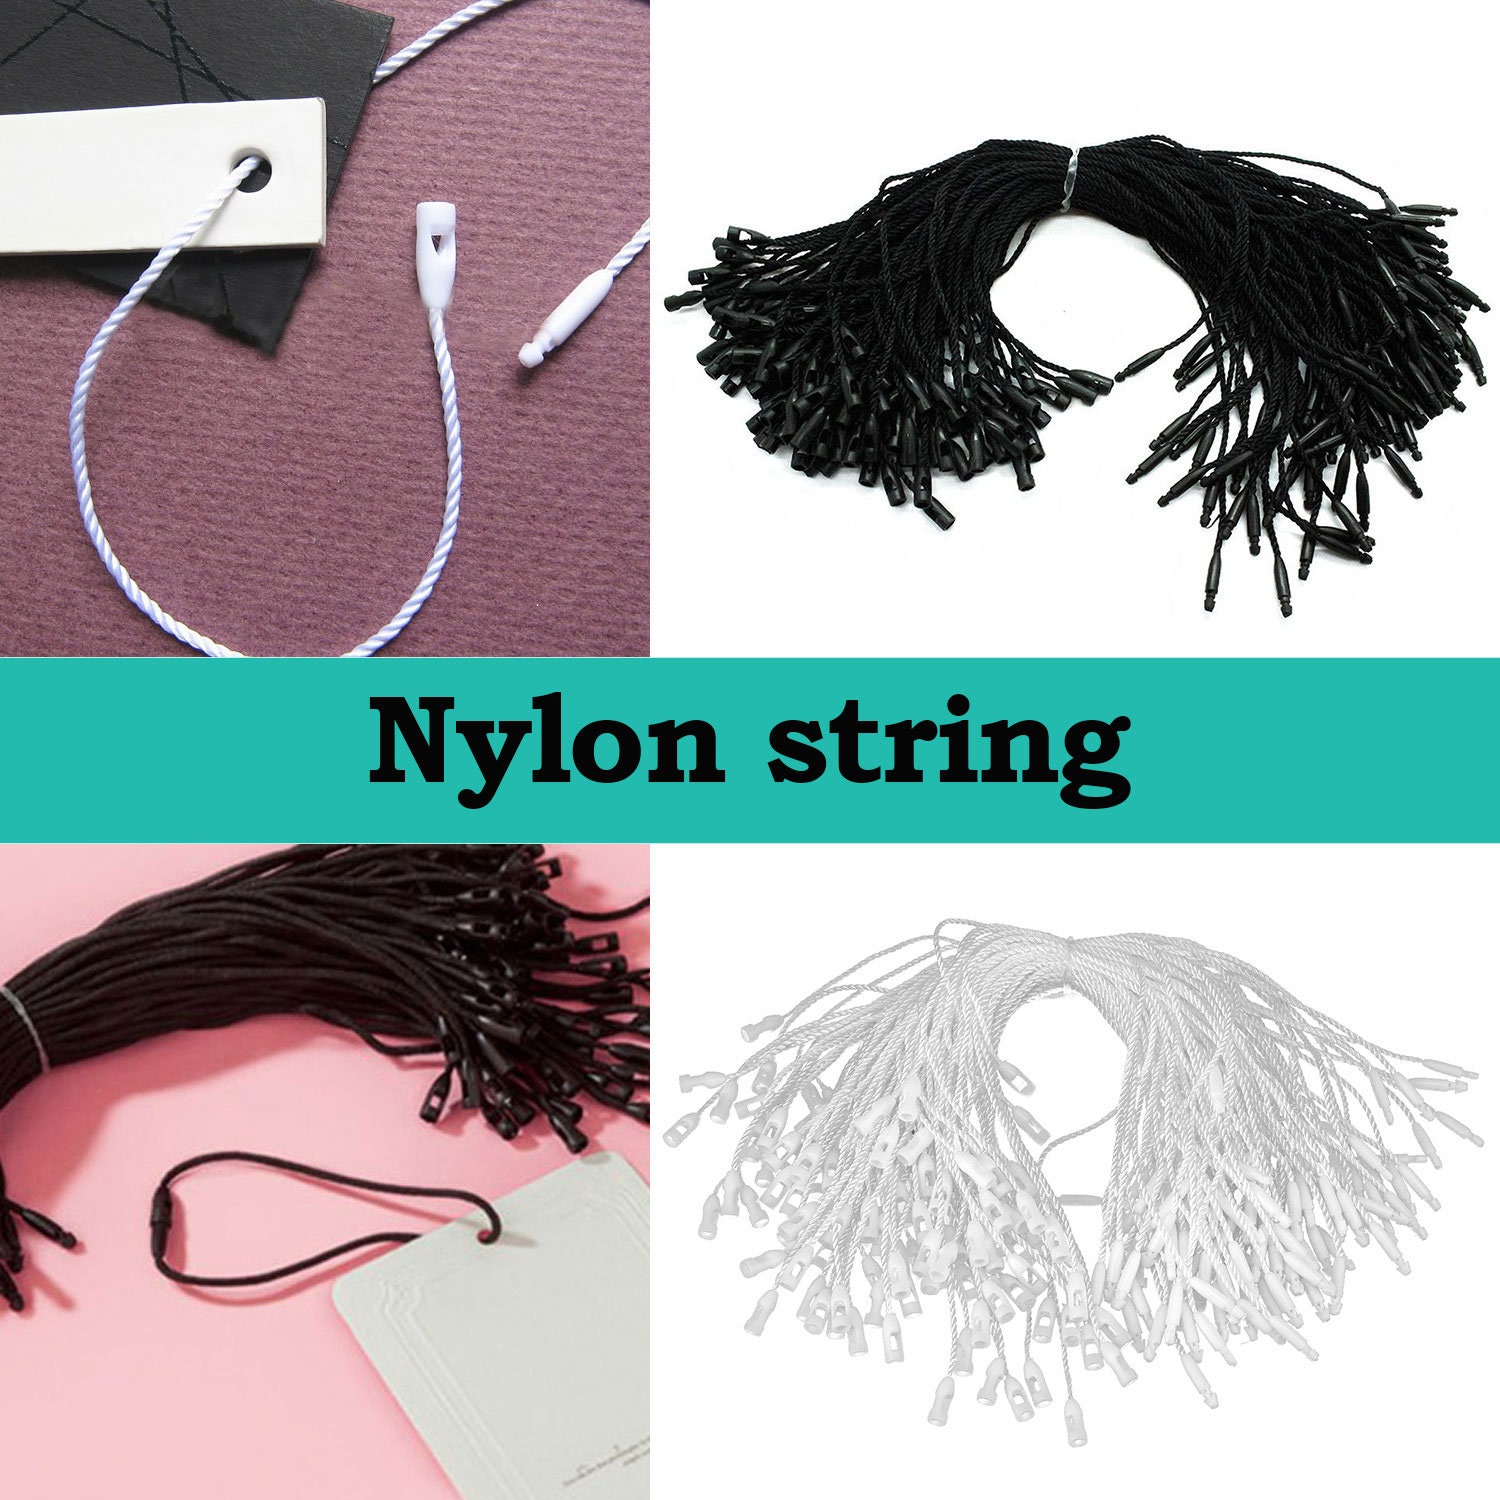 10 Inch Black Nylon String for Hang Tags Snap Lock for Attaching